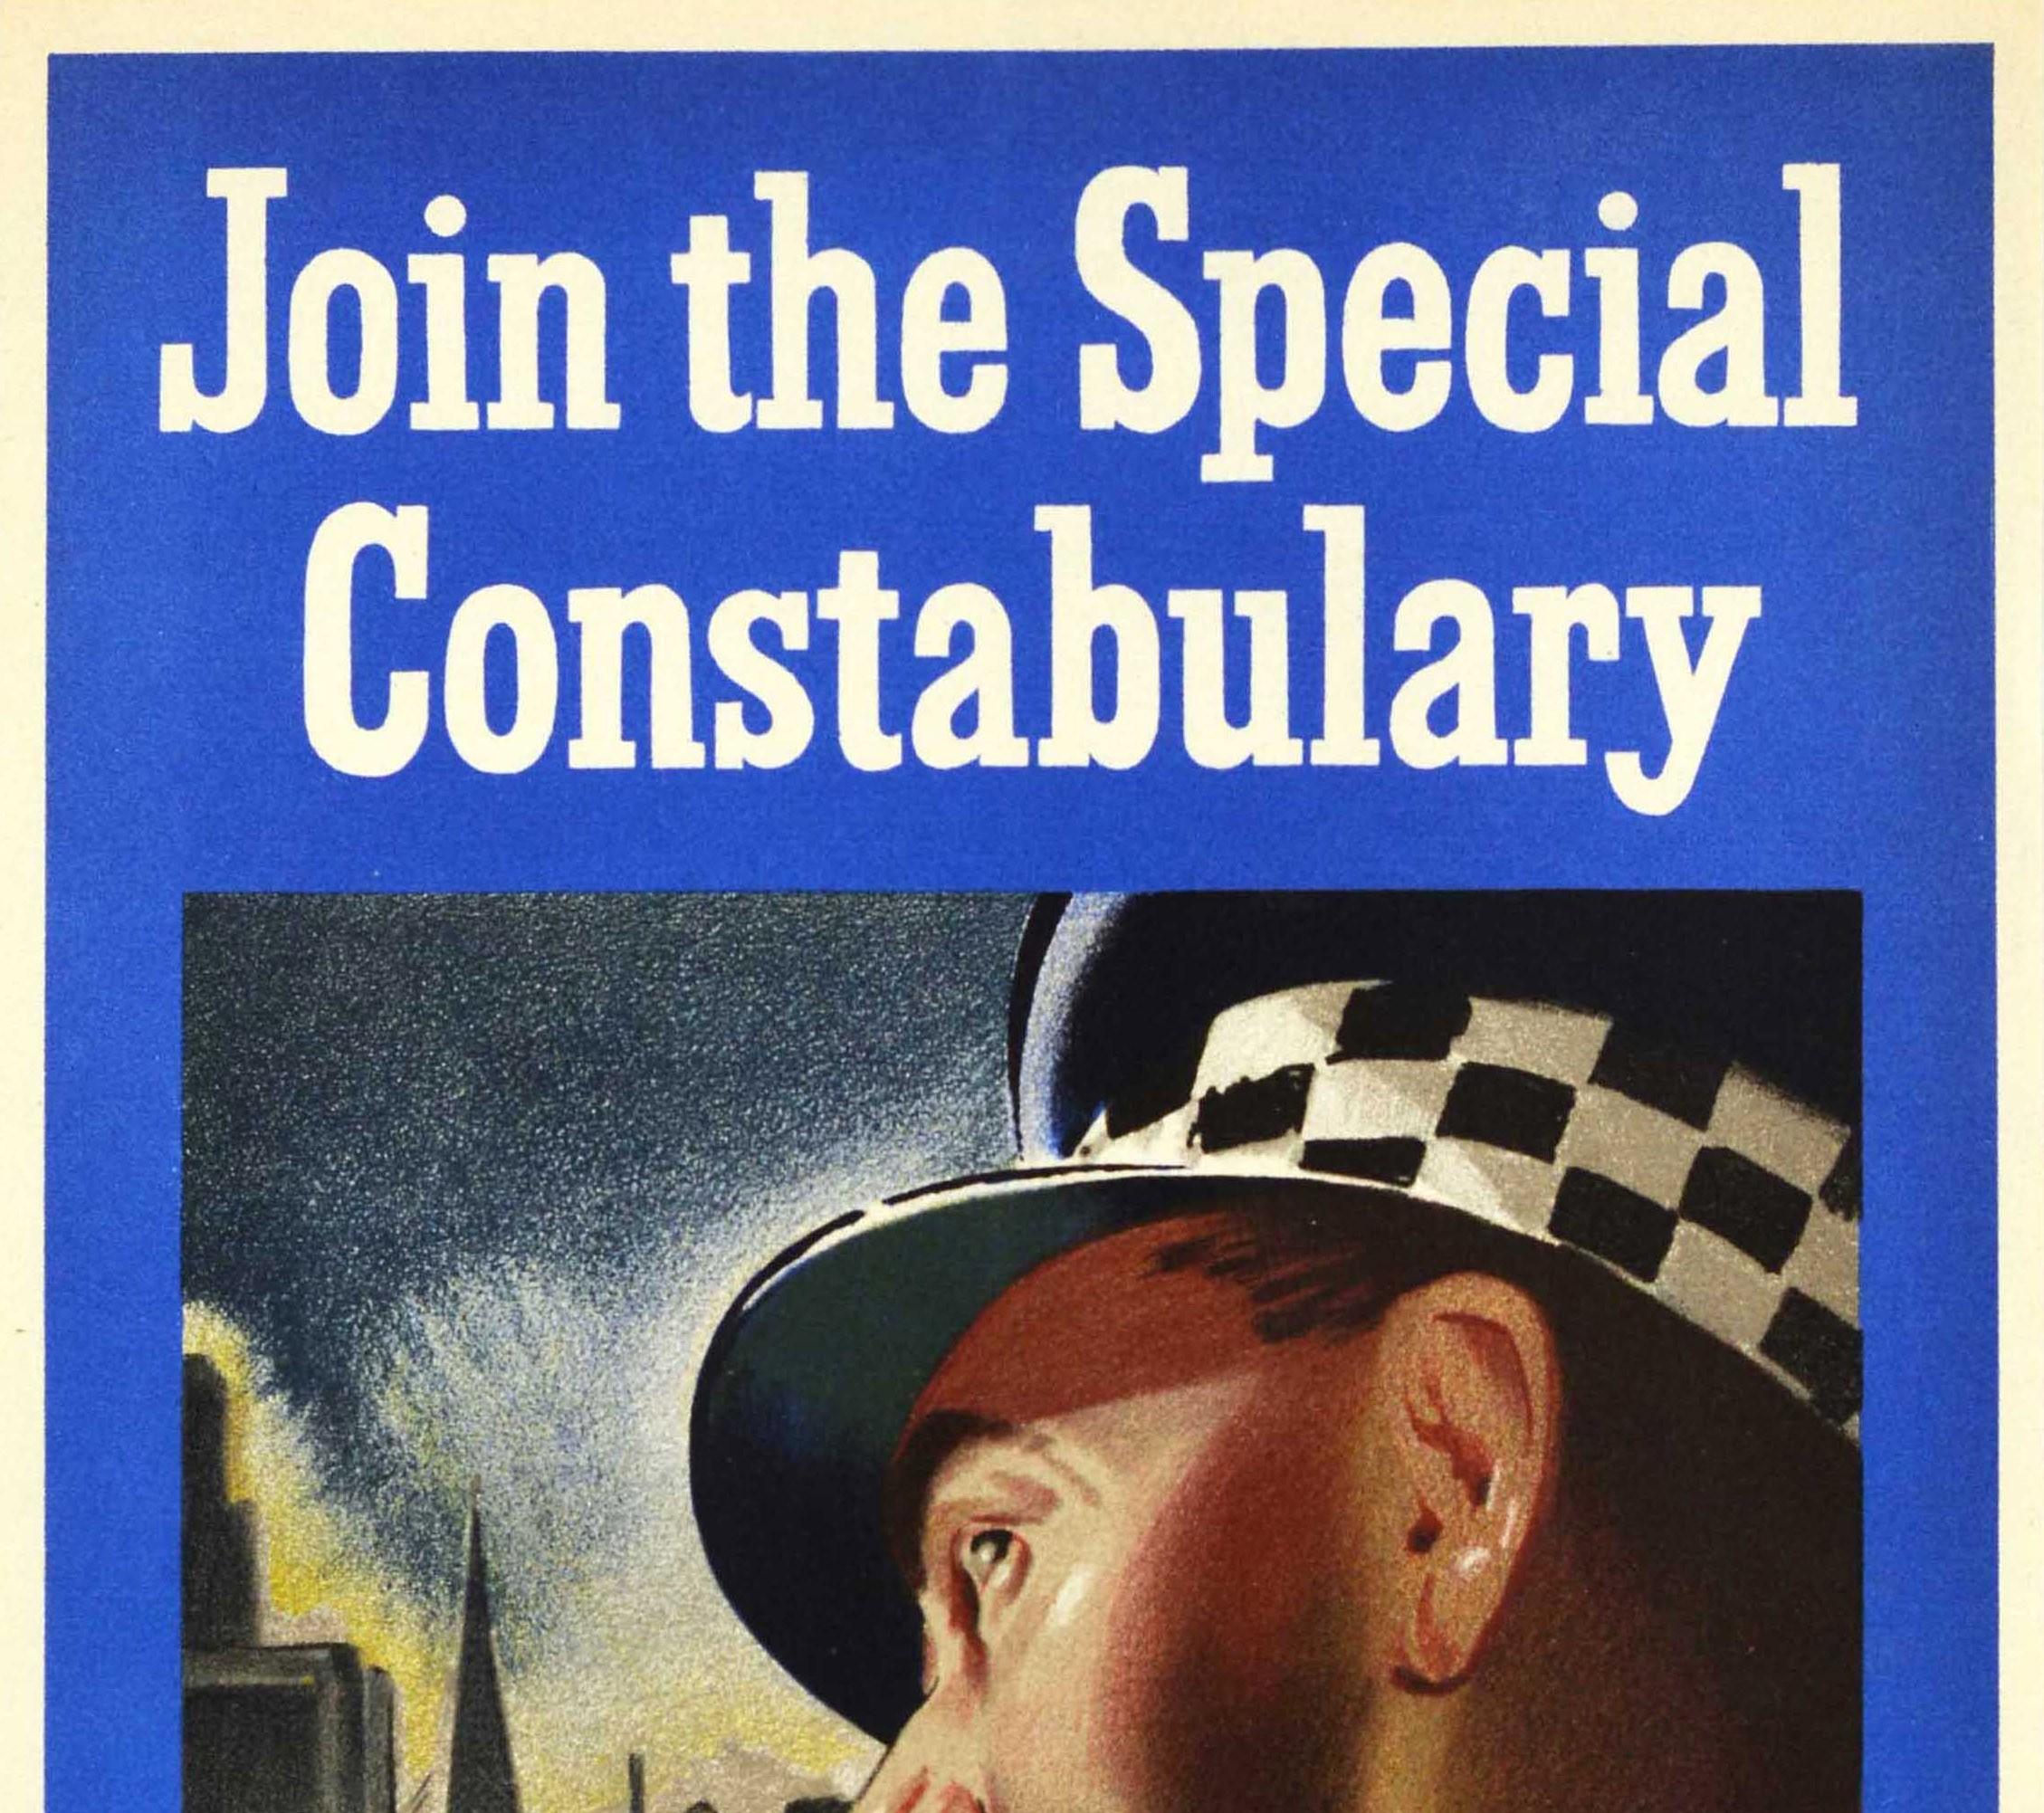 Original vintage recruitment poster - Join the Special Constabulary Ask at your local Police Station - featuring artwork depicting a man in uniform on a telephone with a red car driving below a street light and buildings in the background, the text